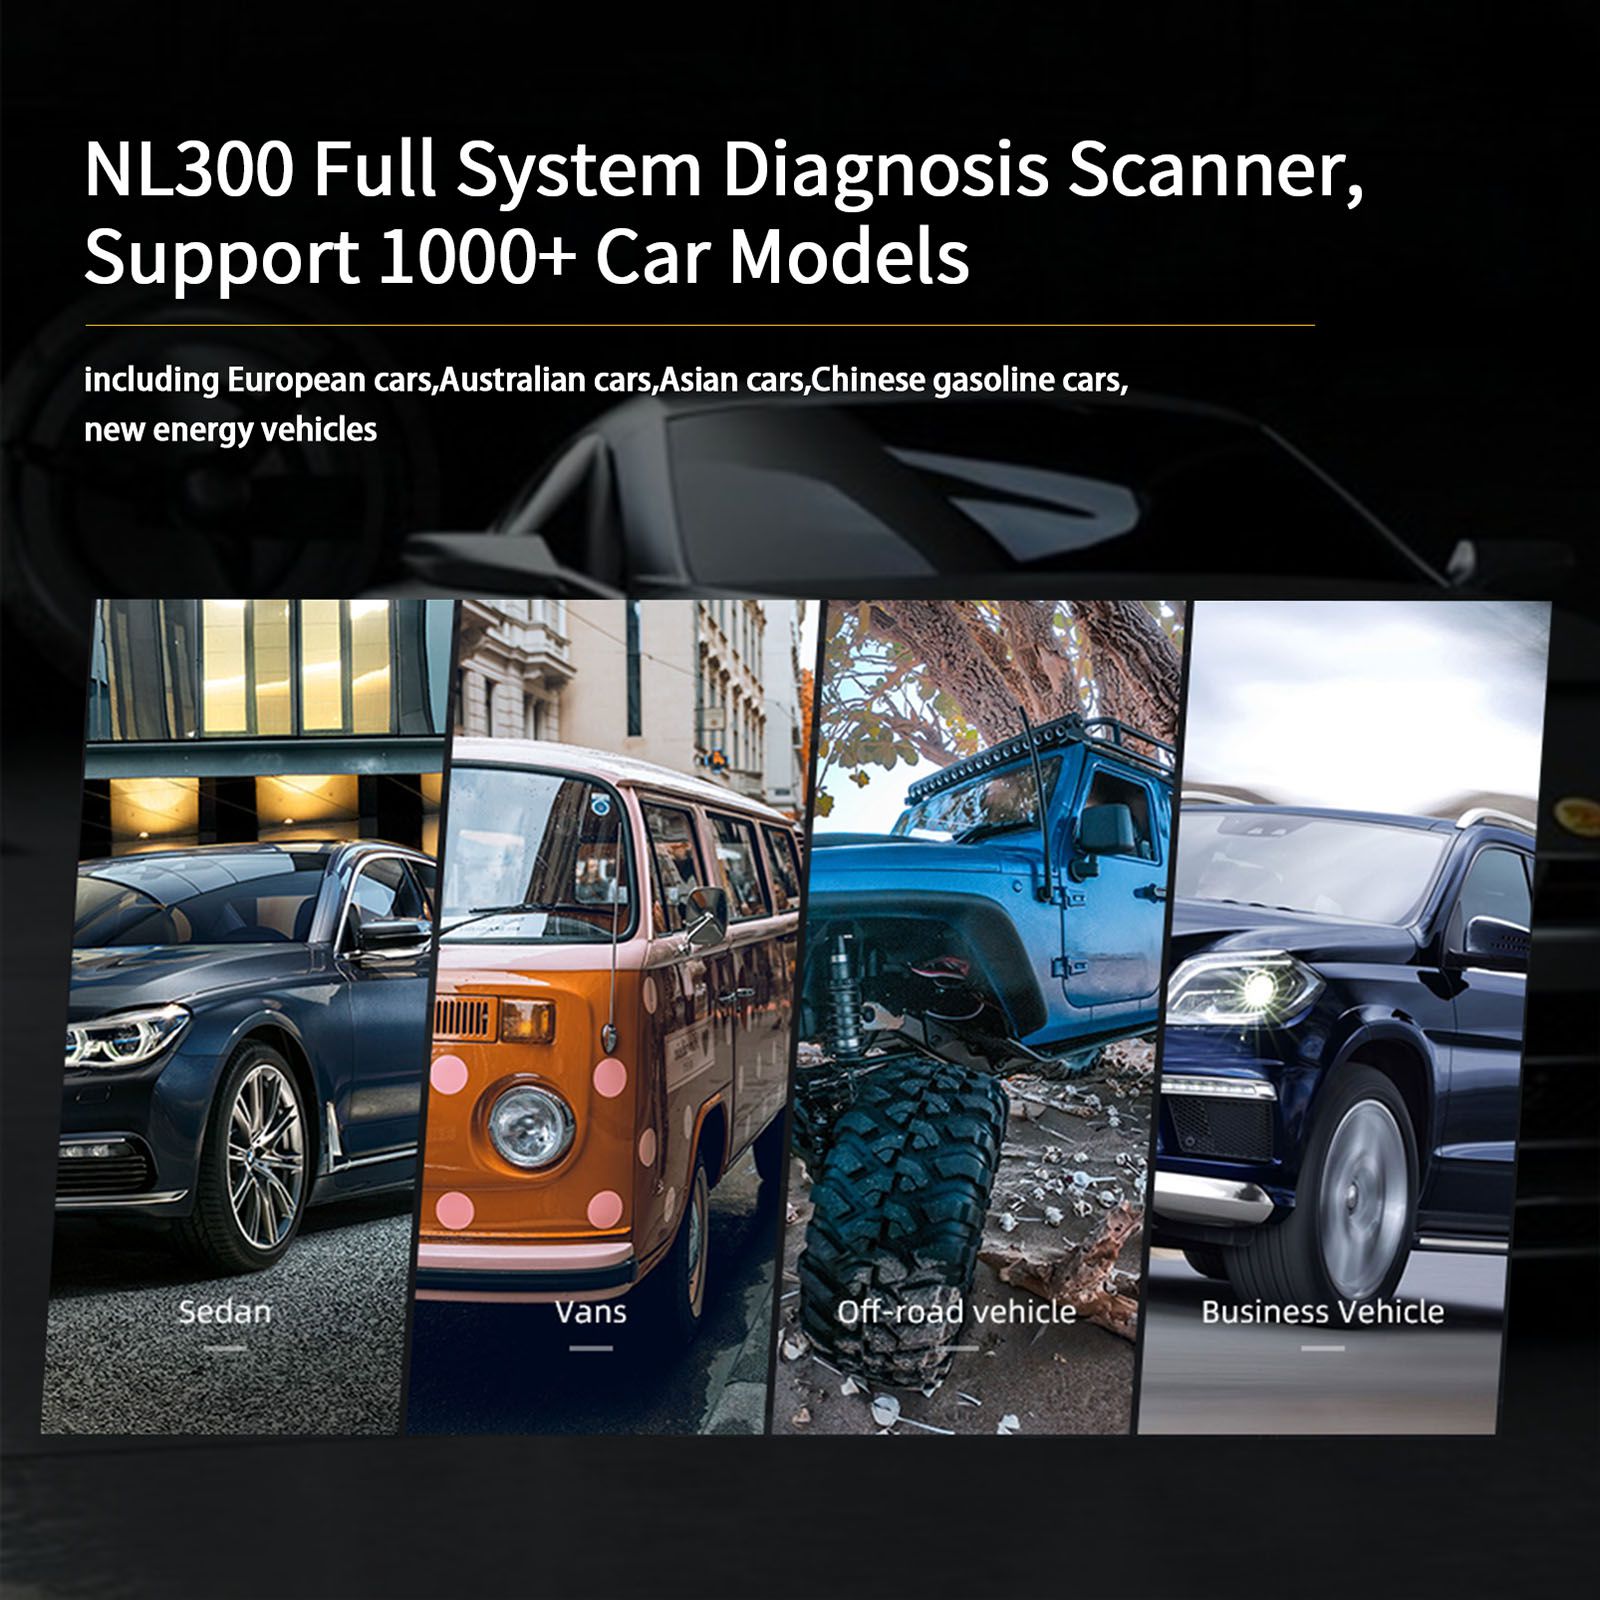 2022 Newest Humzor NEXZSCAN NL300 Full System Diagnoses Scanner With Multi-Reset Functions Free Software Update